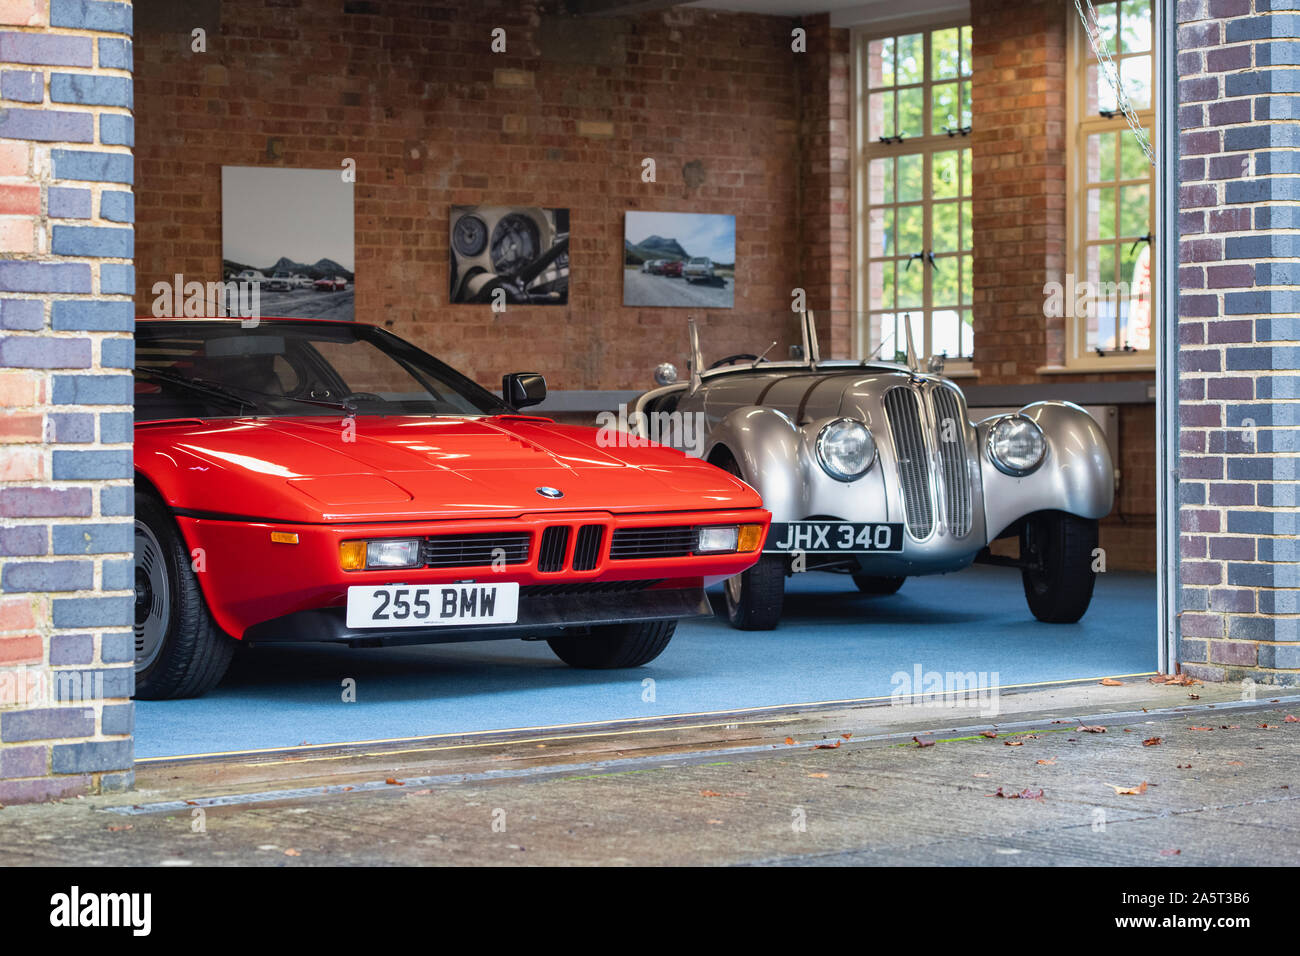 1981 BMW M1 and 1933 BMW Fraser Nash in a workshop at Bicester Heritage Centre sunday scramble event. Bicester, Oxfordshire, England Stock Photo